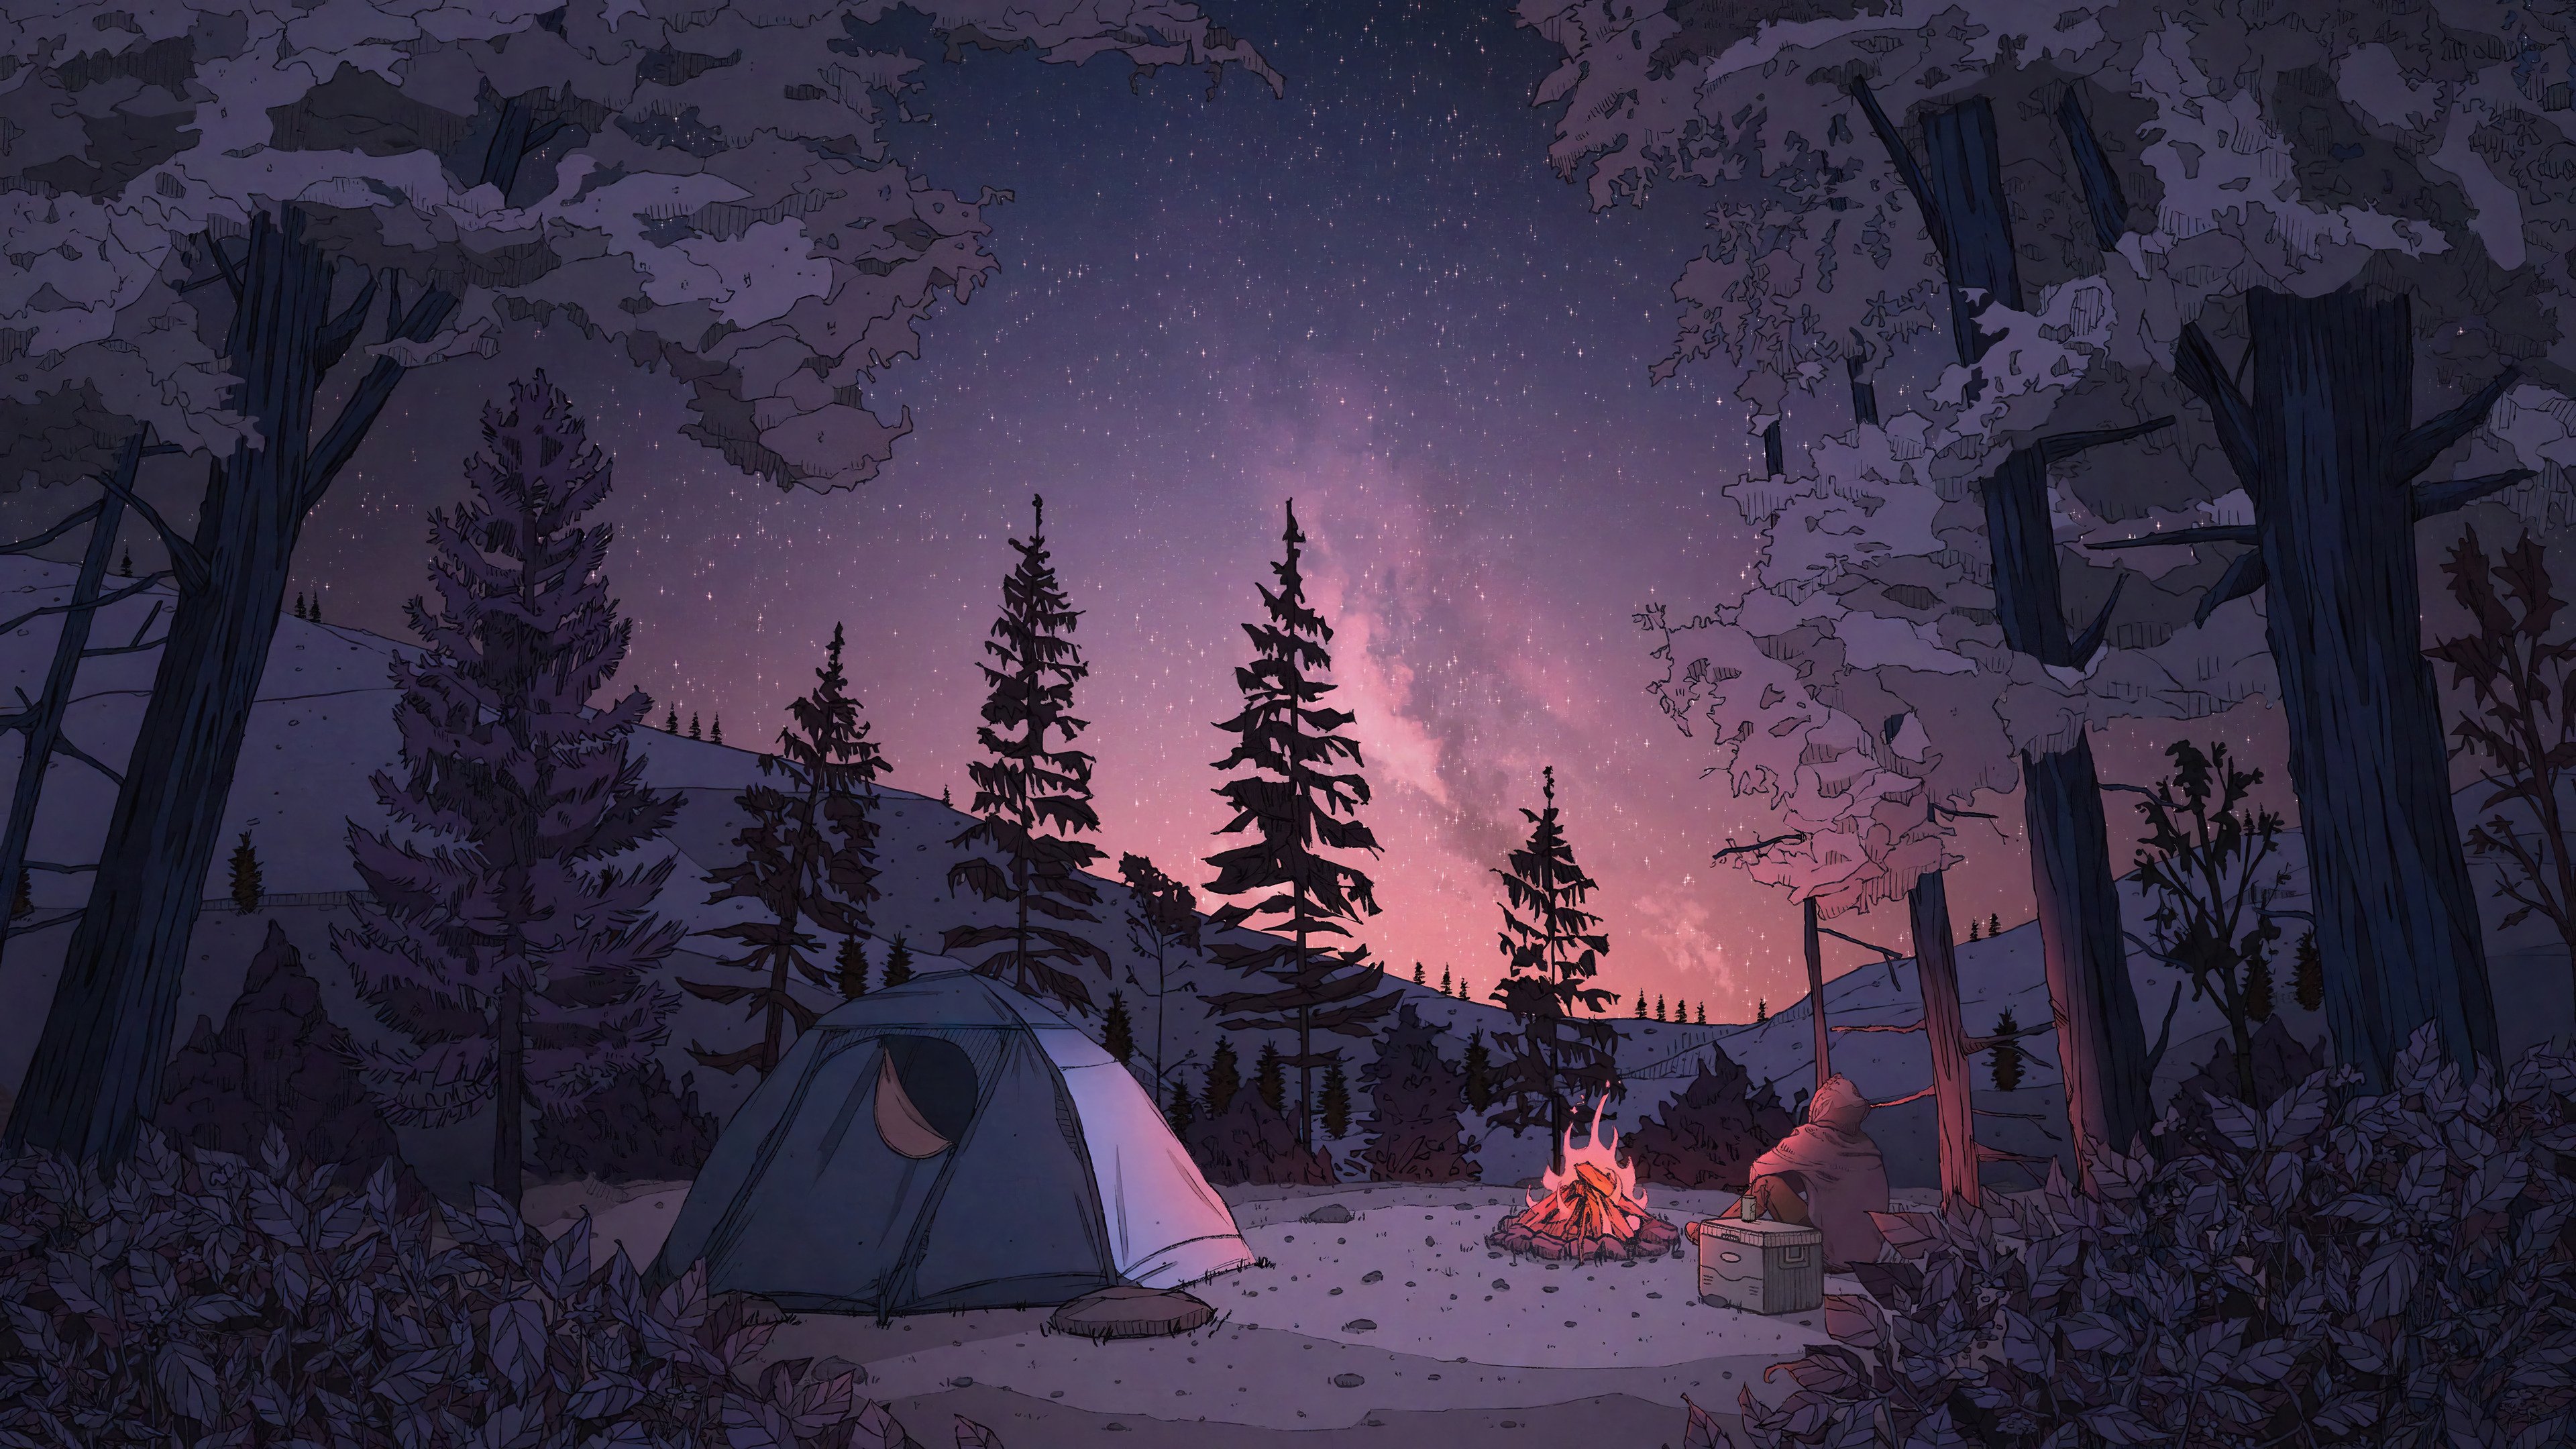 Wallpaper Camping in the forest